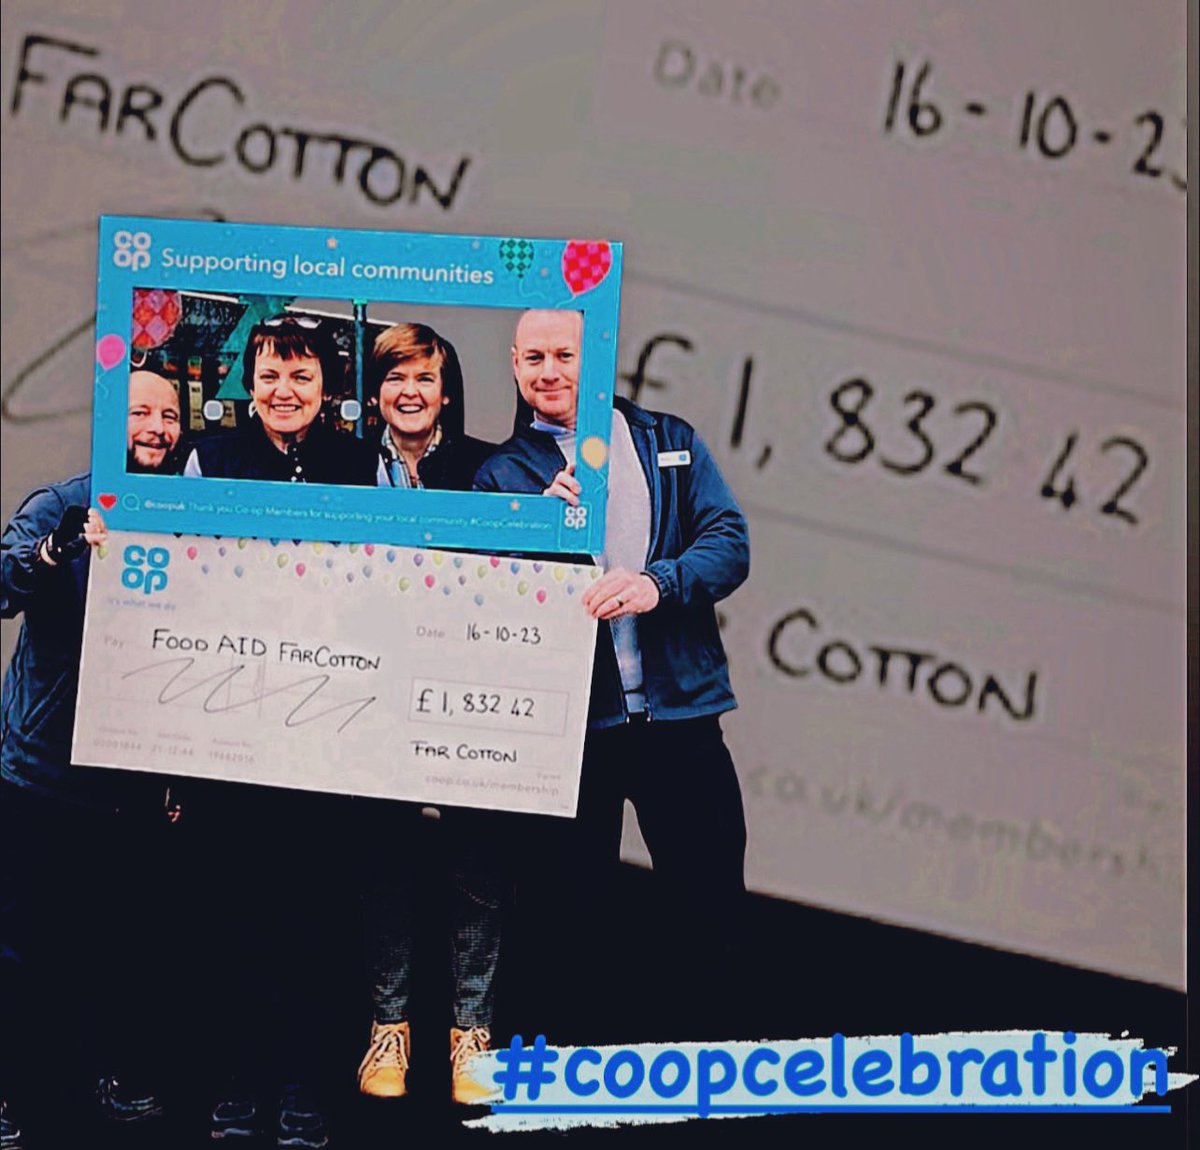 Celebrations today with Far Cotton Food AID as part of our cluster group 🙌 🎉 #CoopCelebration #coopuk @Ragesh2018